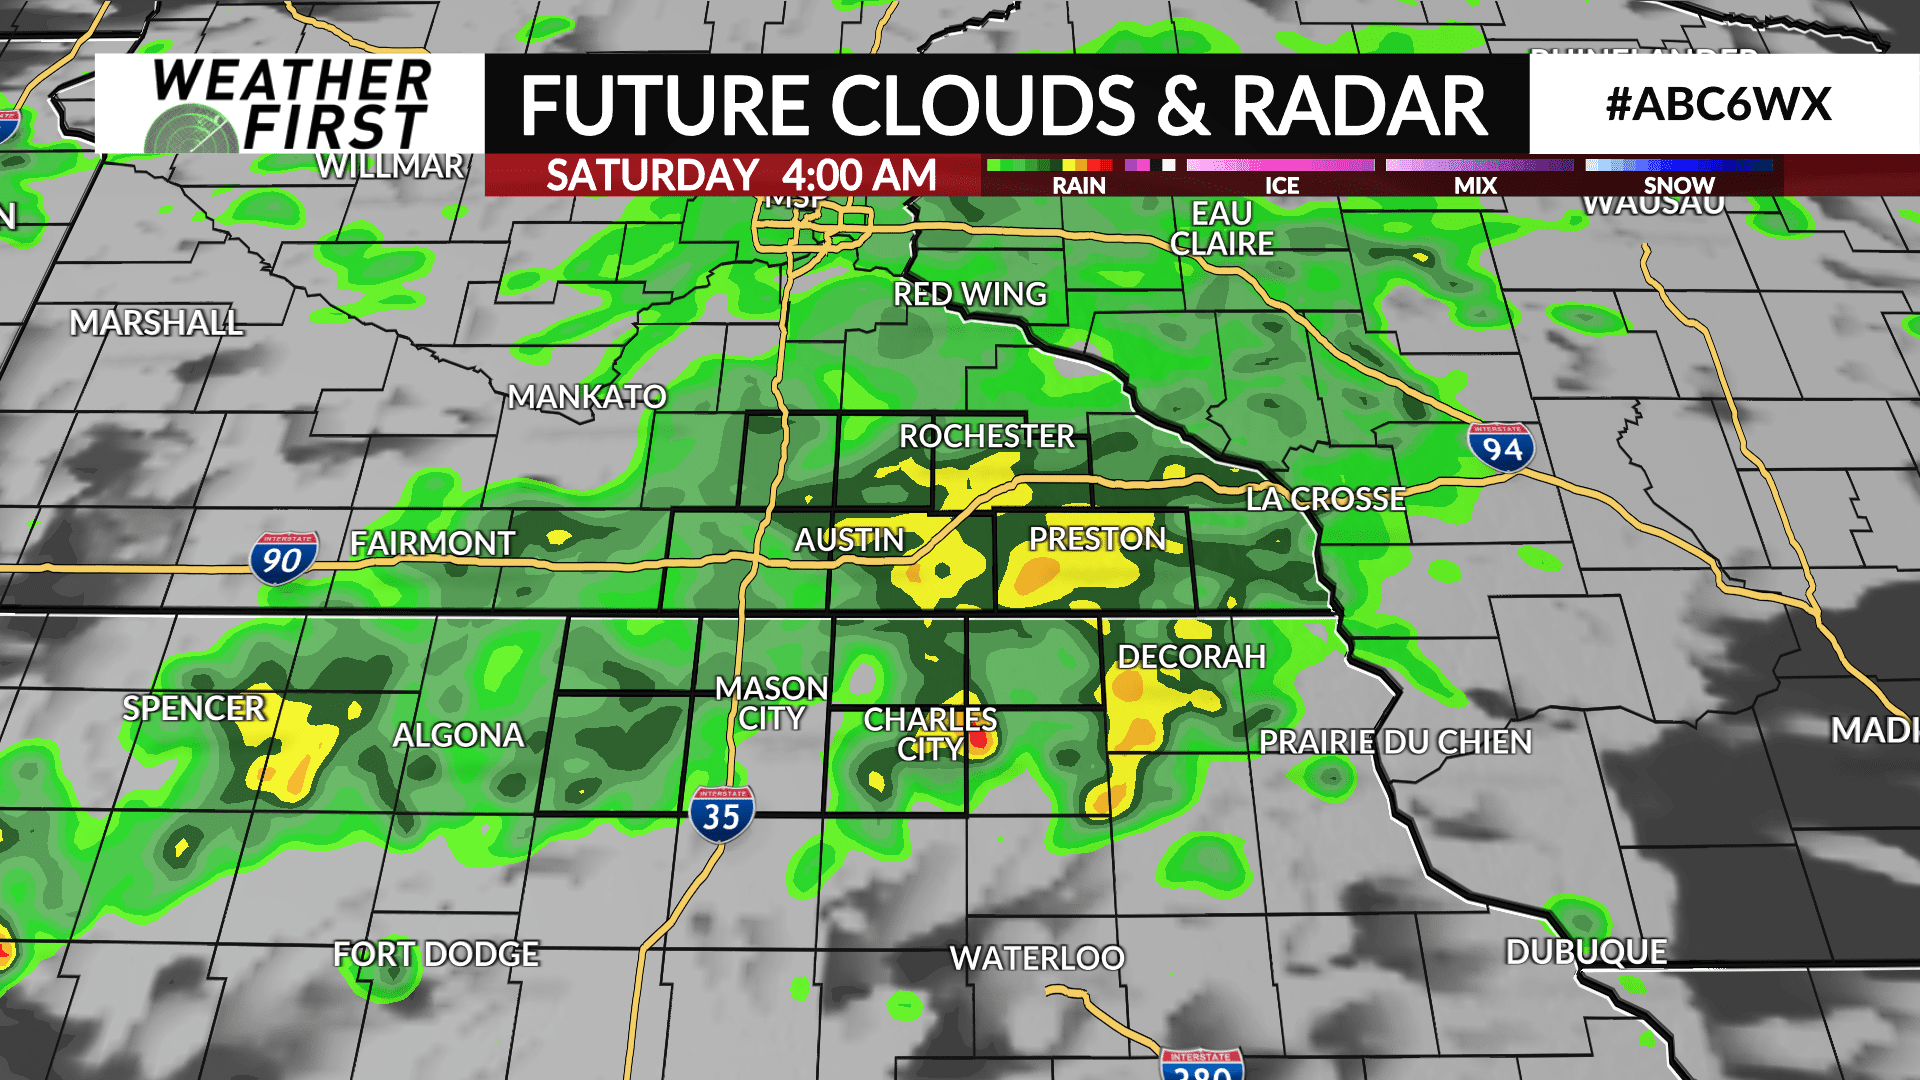 Saturday: Rain everywhere early, isolated showers and clearing later